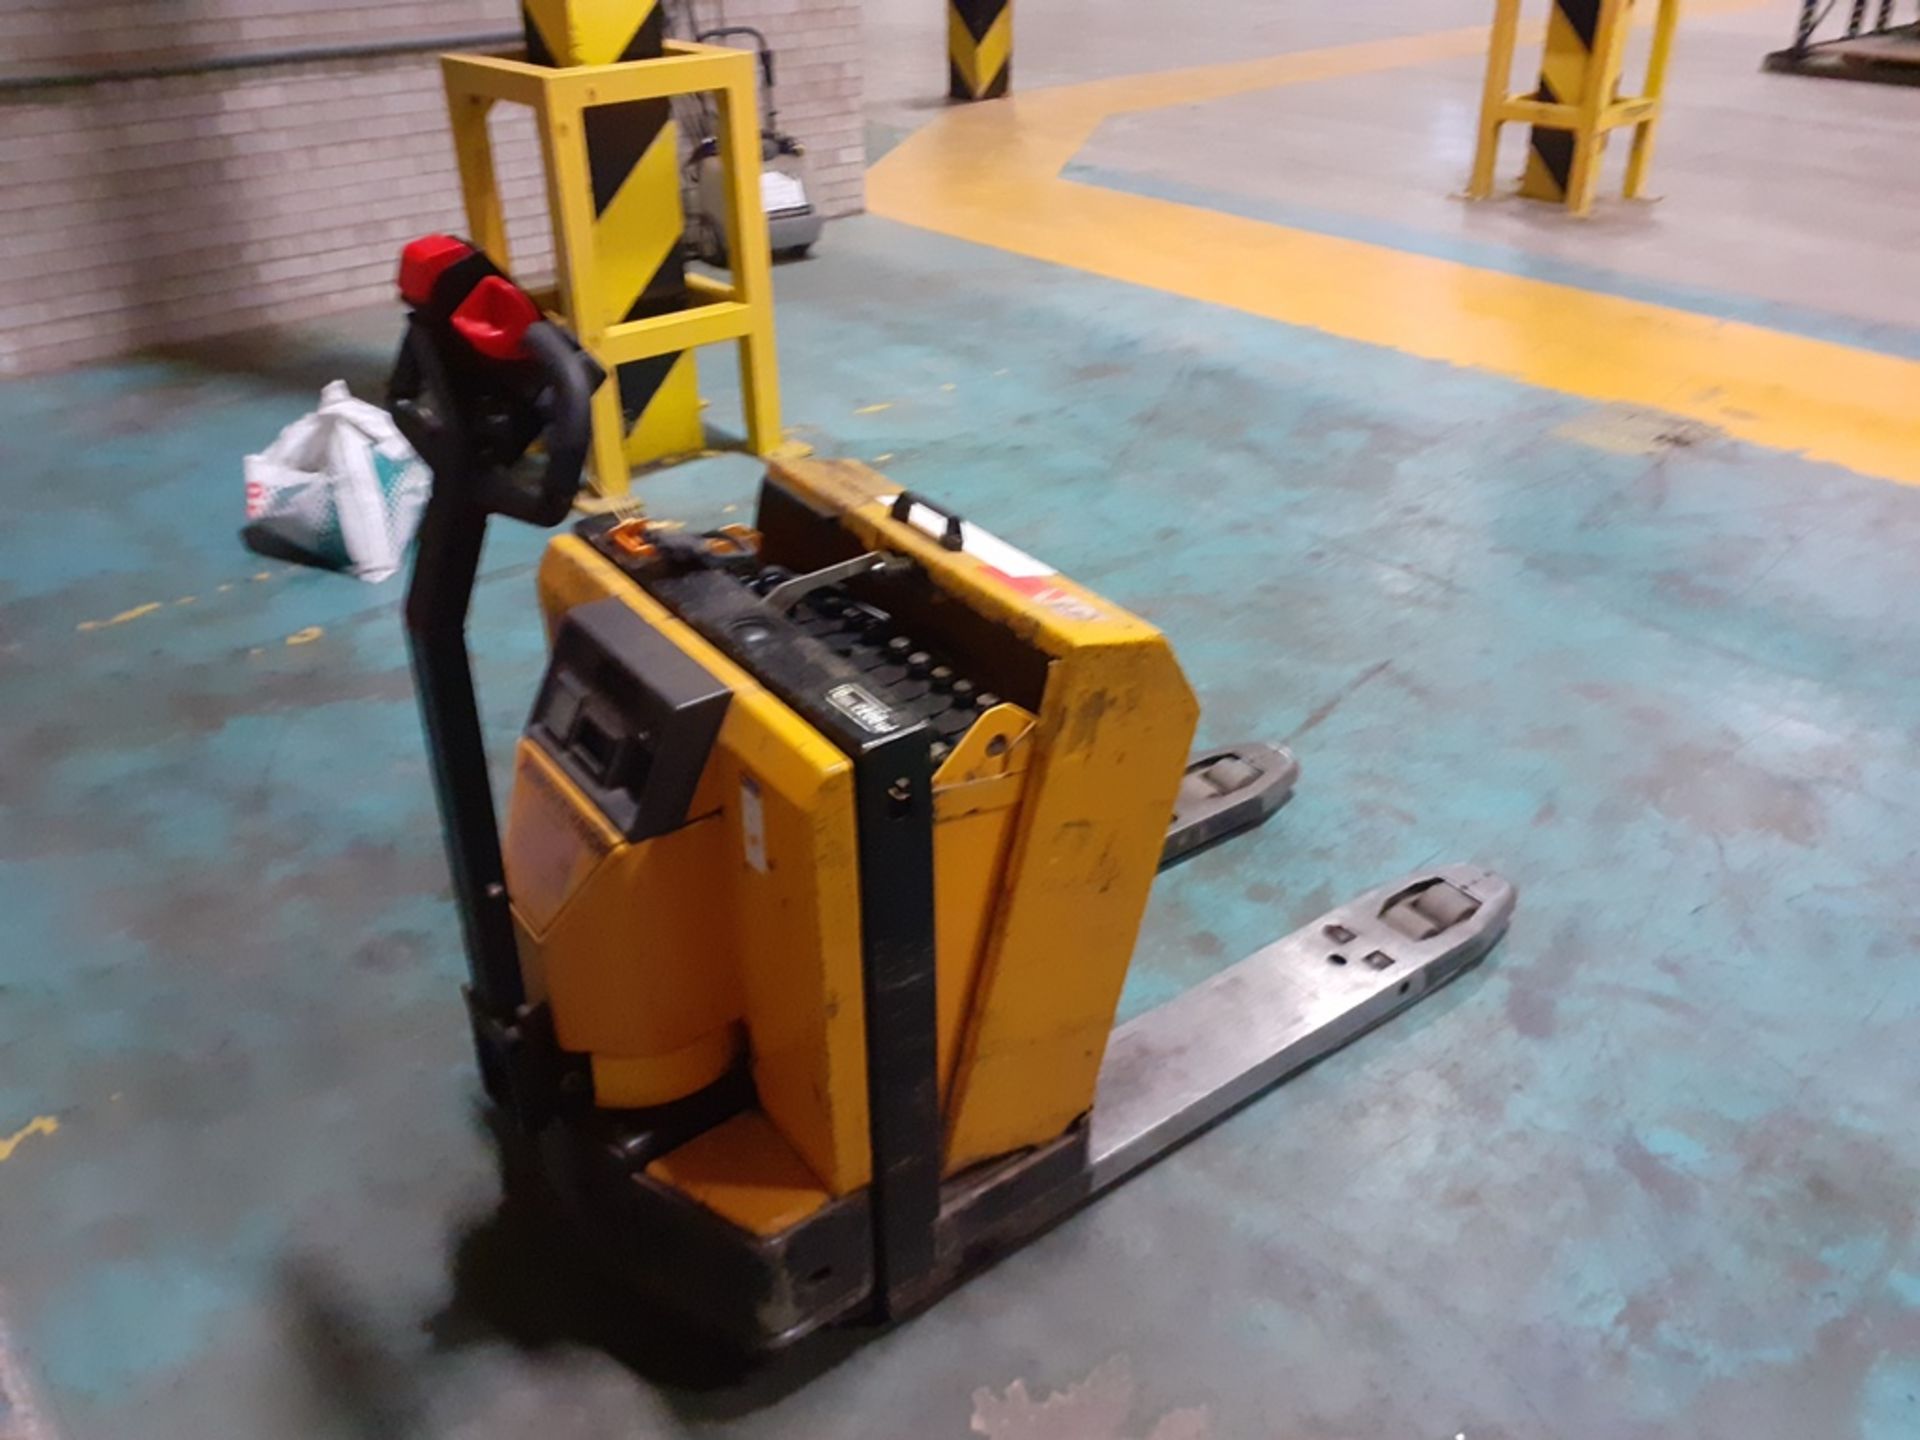 Jungheinrich EJE 22 electric pallet truck, s/n 80326775, with Chloride 24 charger, s/n AB 00930236. - Image 2 of 5